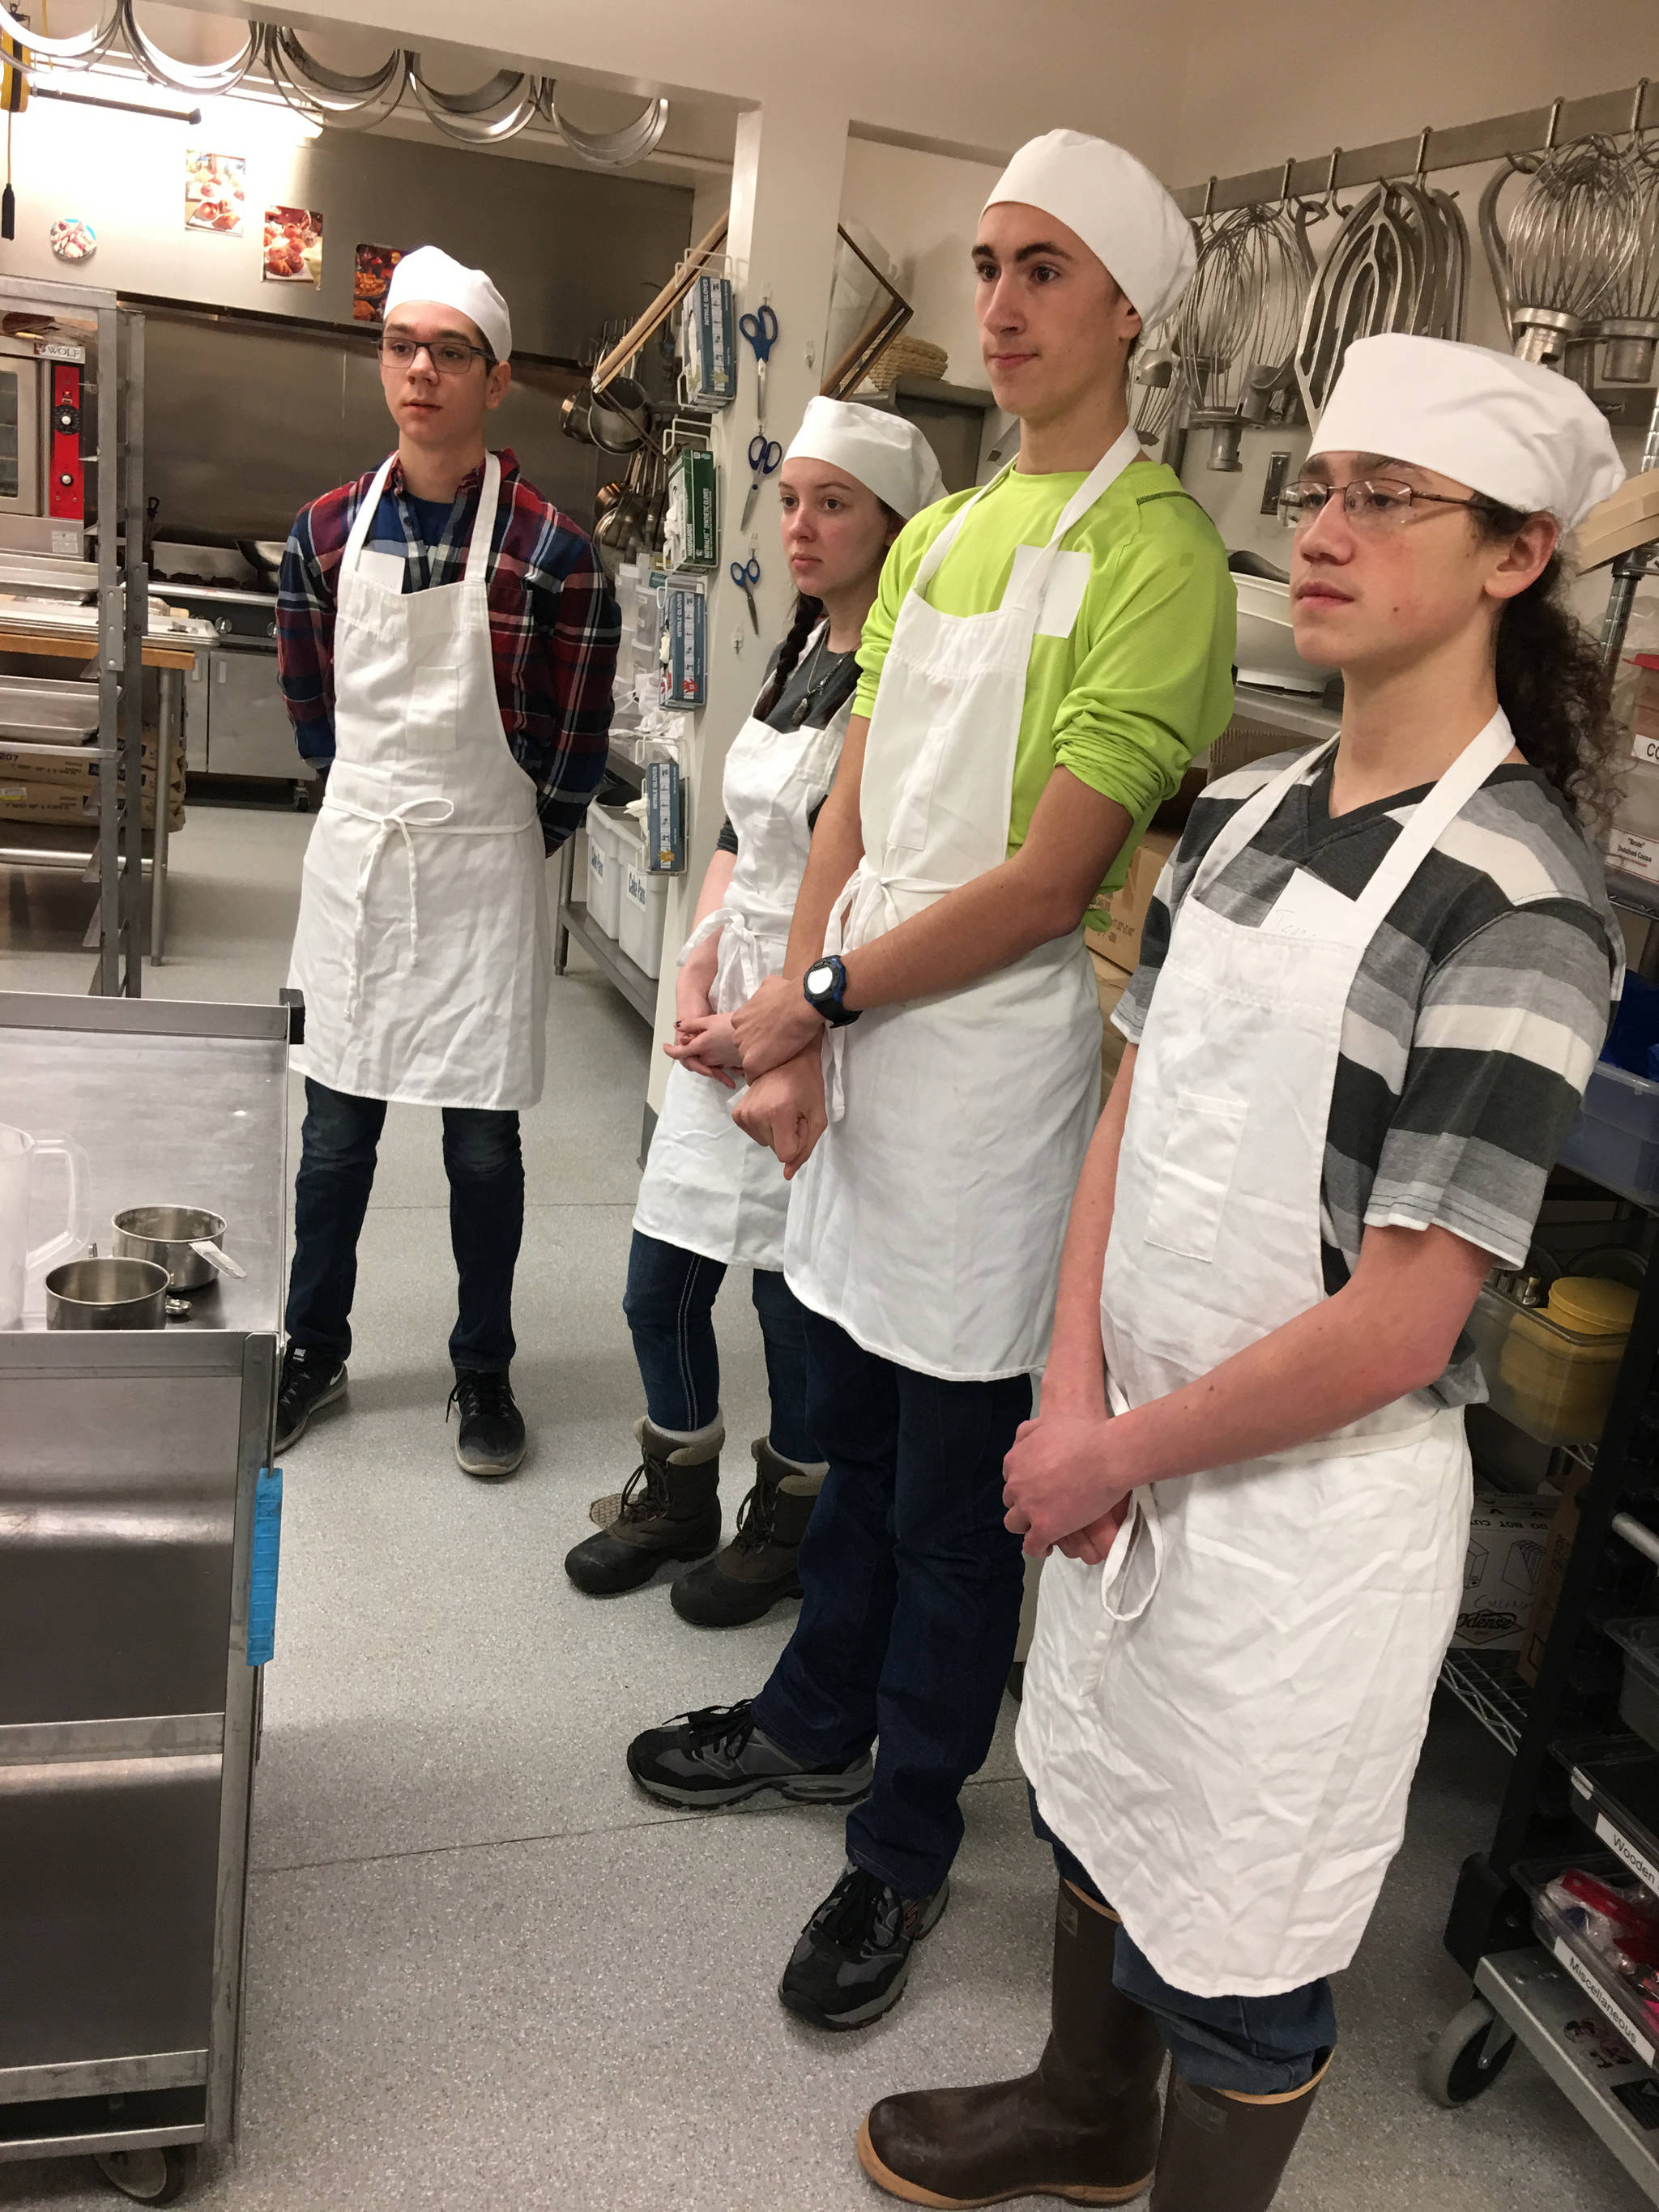 Thirteen Homer High School students visited the Alaska Vocational Training Education Center in Seward on Feb. 8 to tour their programs. These four students chose the culinary program to shadow. From left to right are Desmond Vanliere, Sariah Whaley, Andy Super, Isaac Jump. Other students went to Welding, Electrical, and Welding. All the students were pretty serious about attending AVTEC in their chosen field. The school district’s Career and Technical Education program paid for the trip and the over night accommodations (Photo by Lin Hampson)